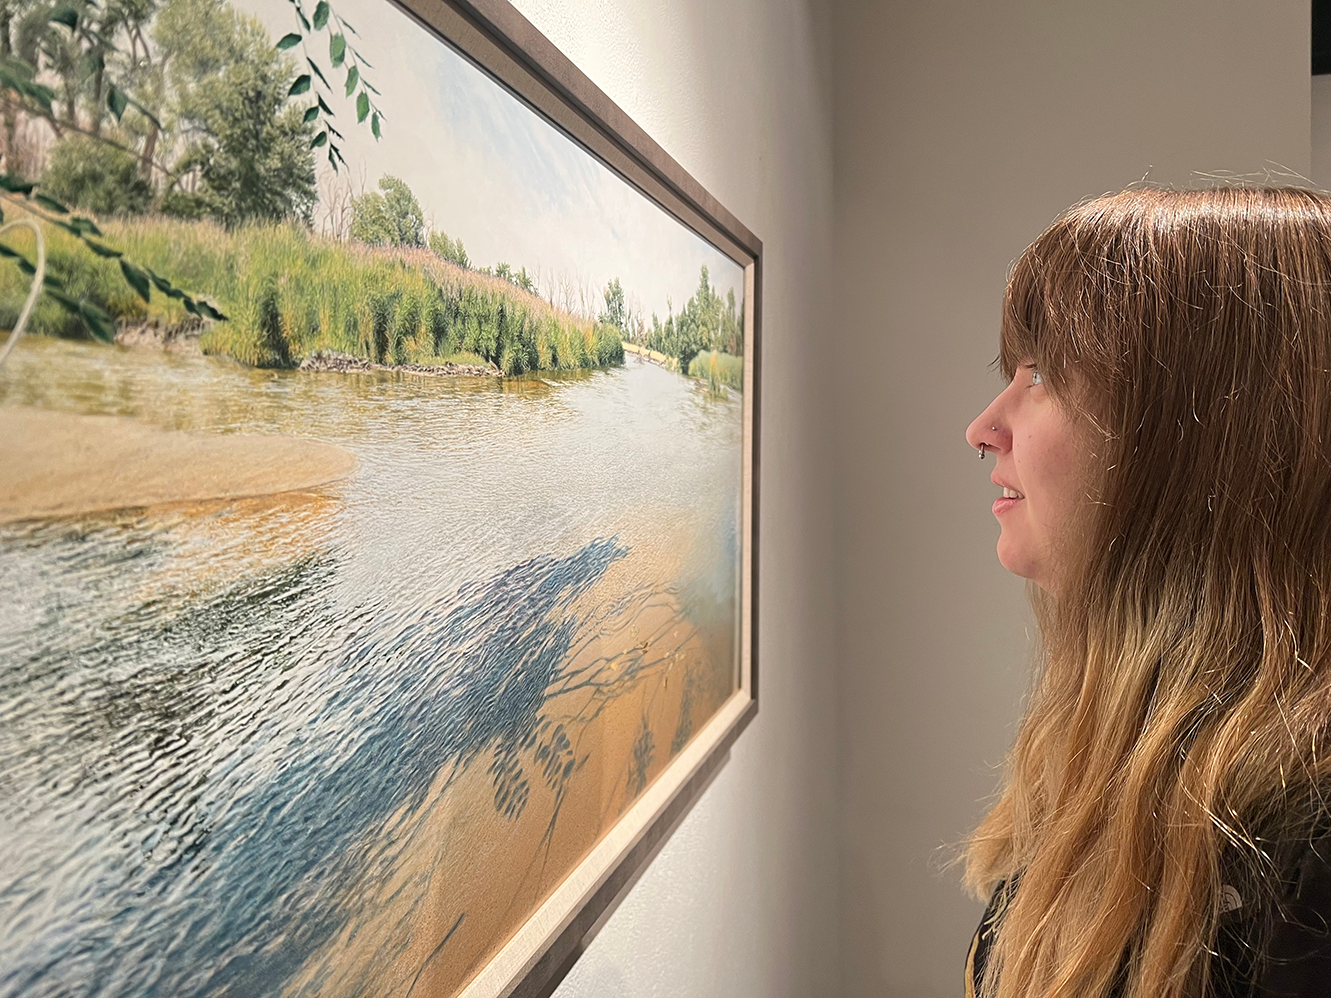 Sydney Badura admires a painting by Fronczak, who worked with abstract paintings for several years before experimenting with realism.